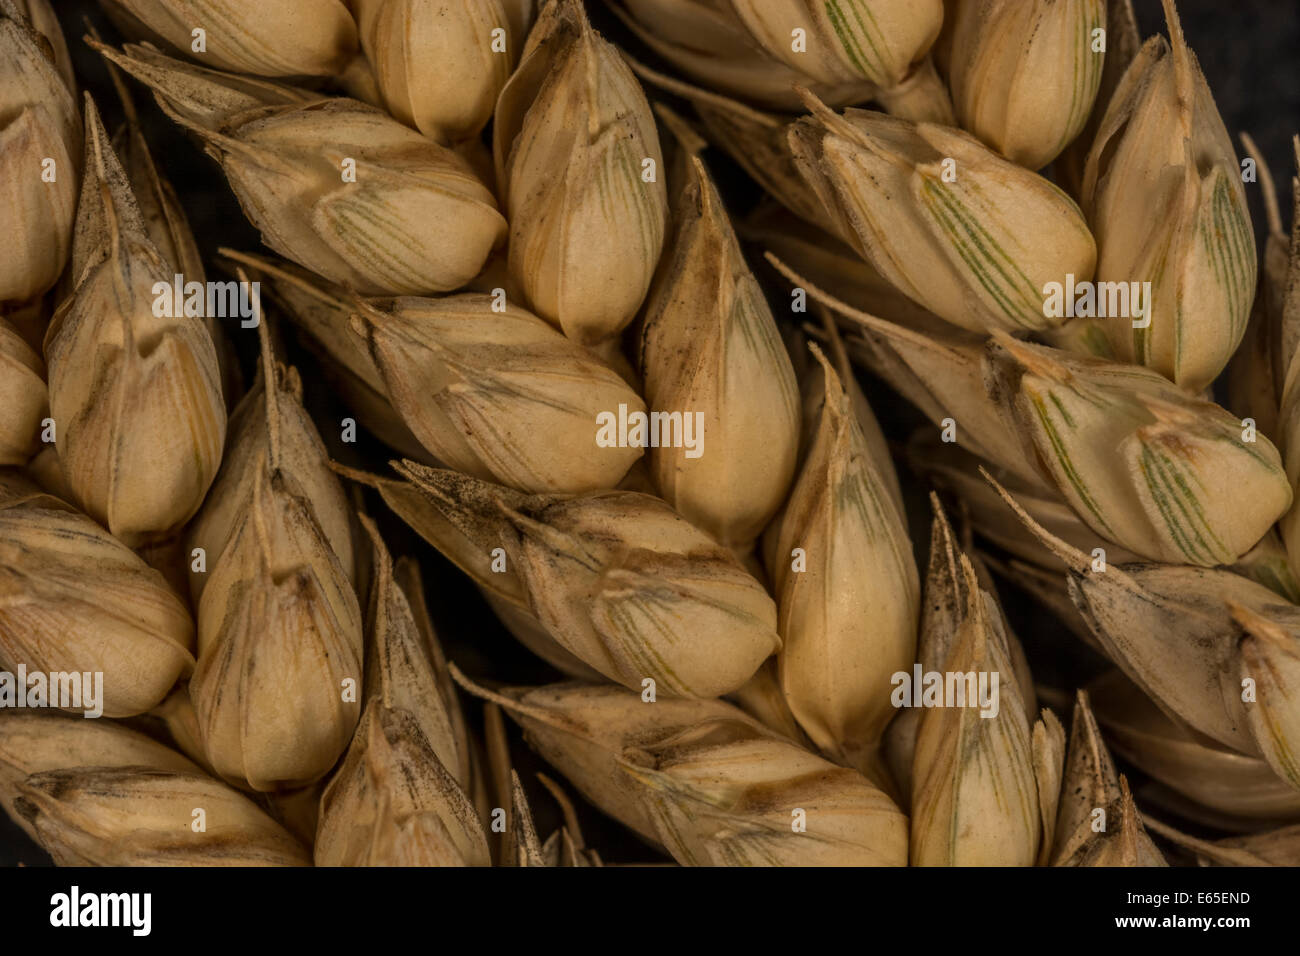 Close-up of wheat (Triticum sp.) ears. Visual metaphor for concept of famine. For food security / growing food, wheat as commodity globally. Stock Photo